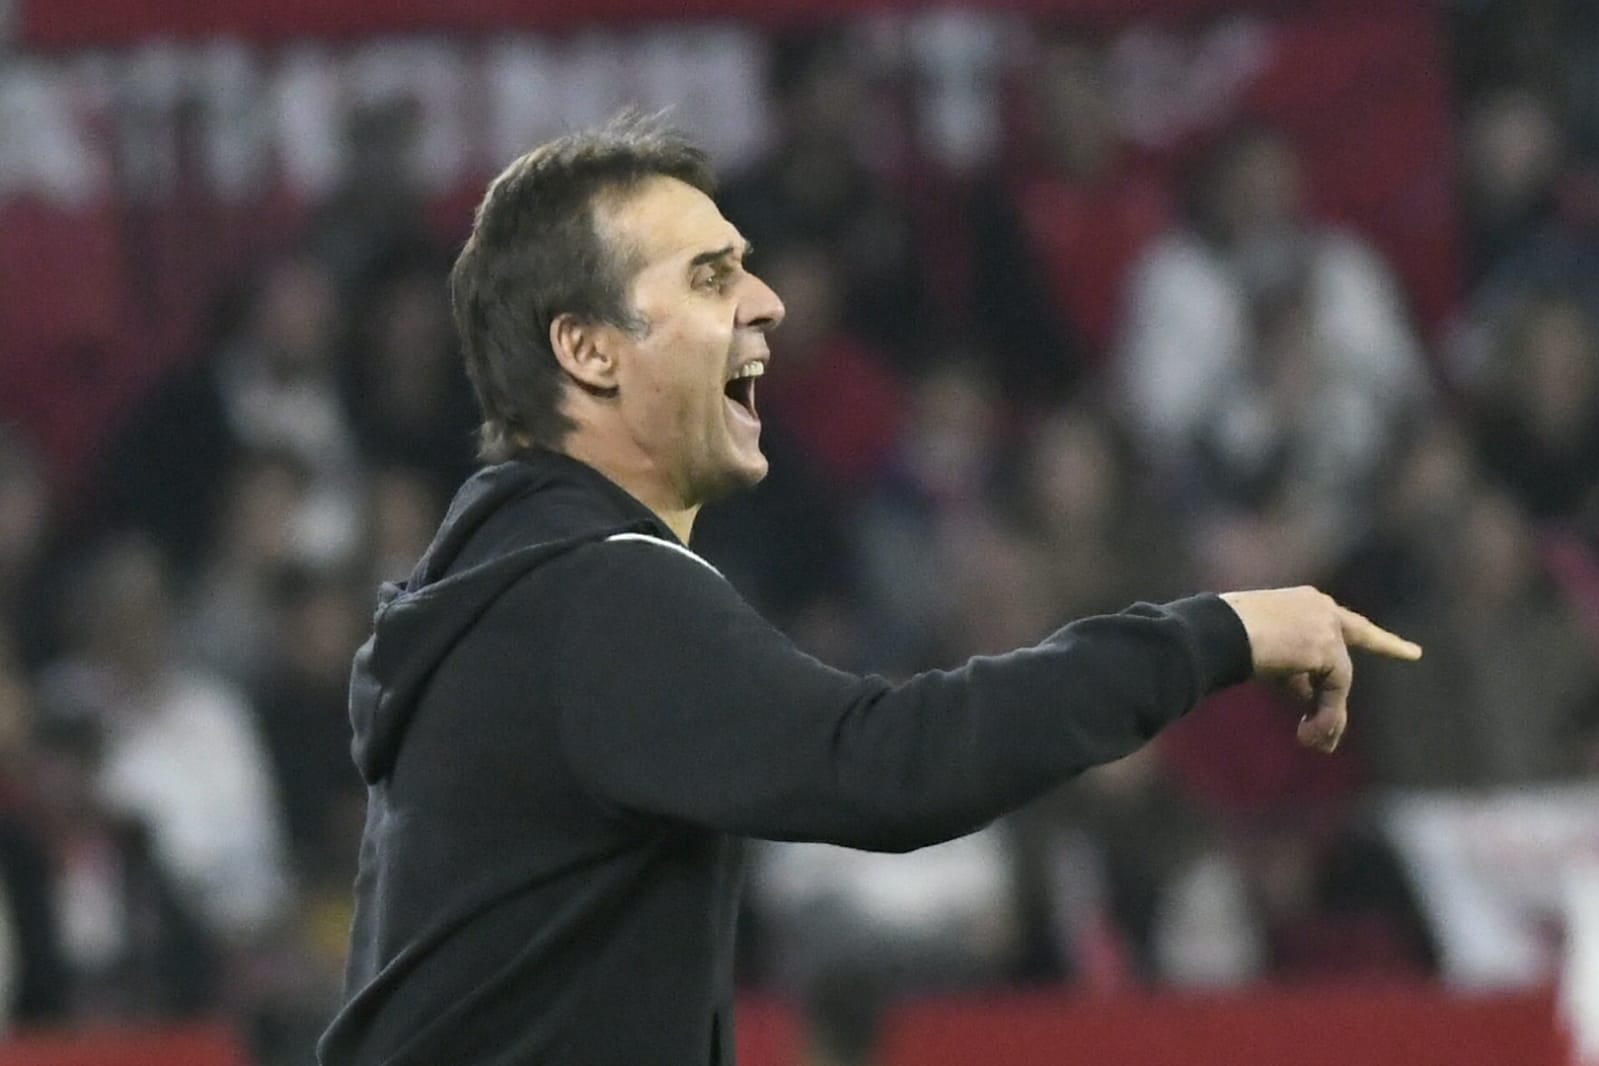 Julen Lopetegui giving instructions to his players